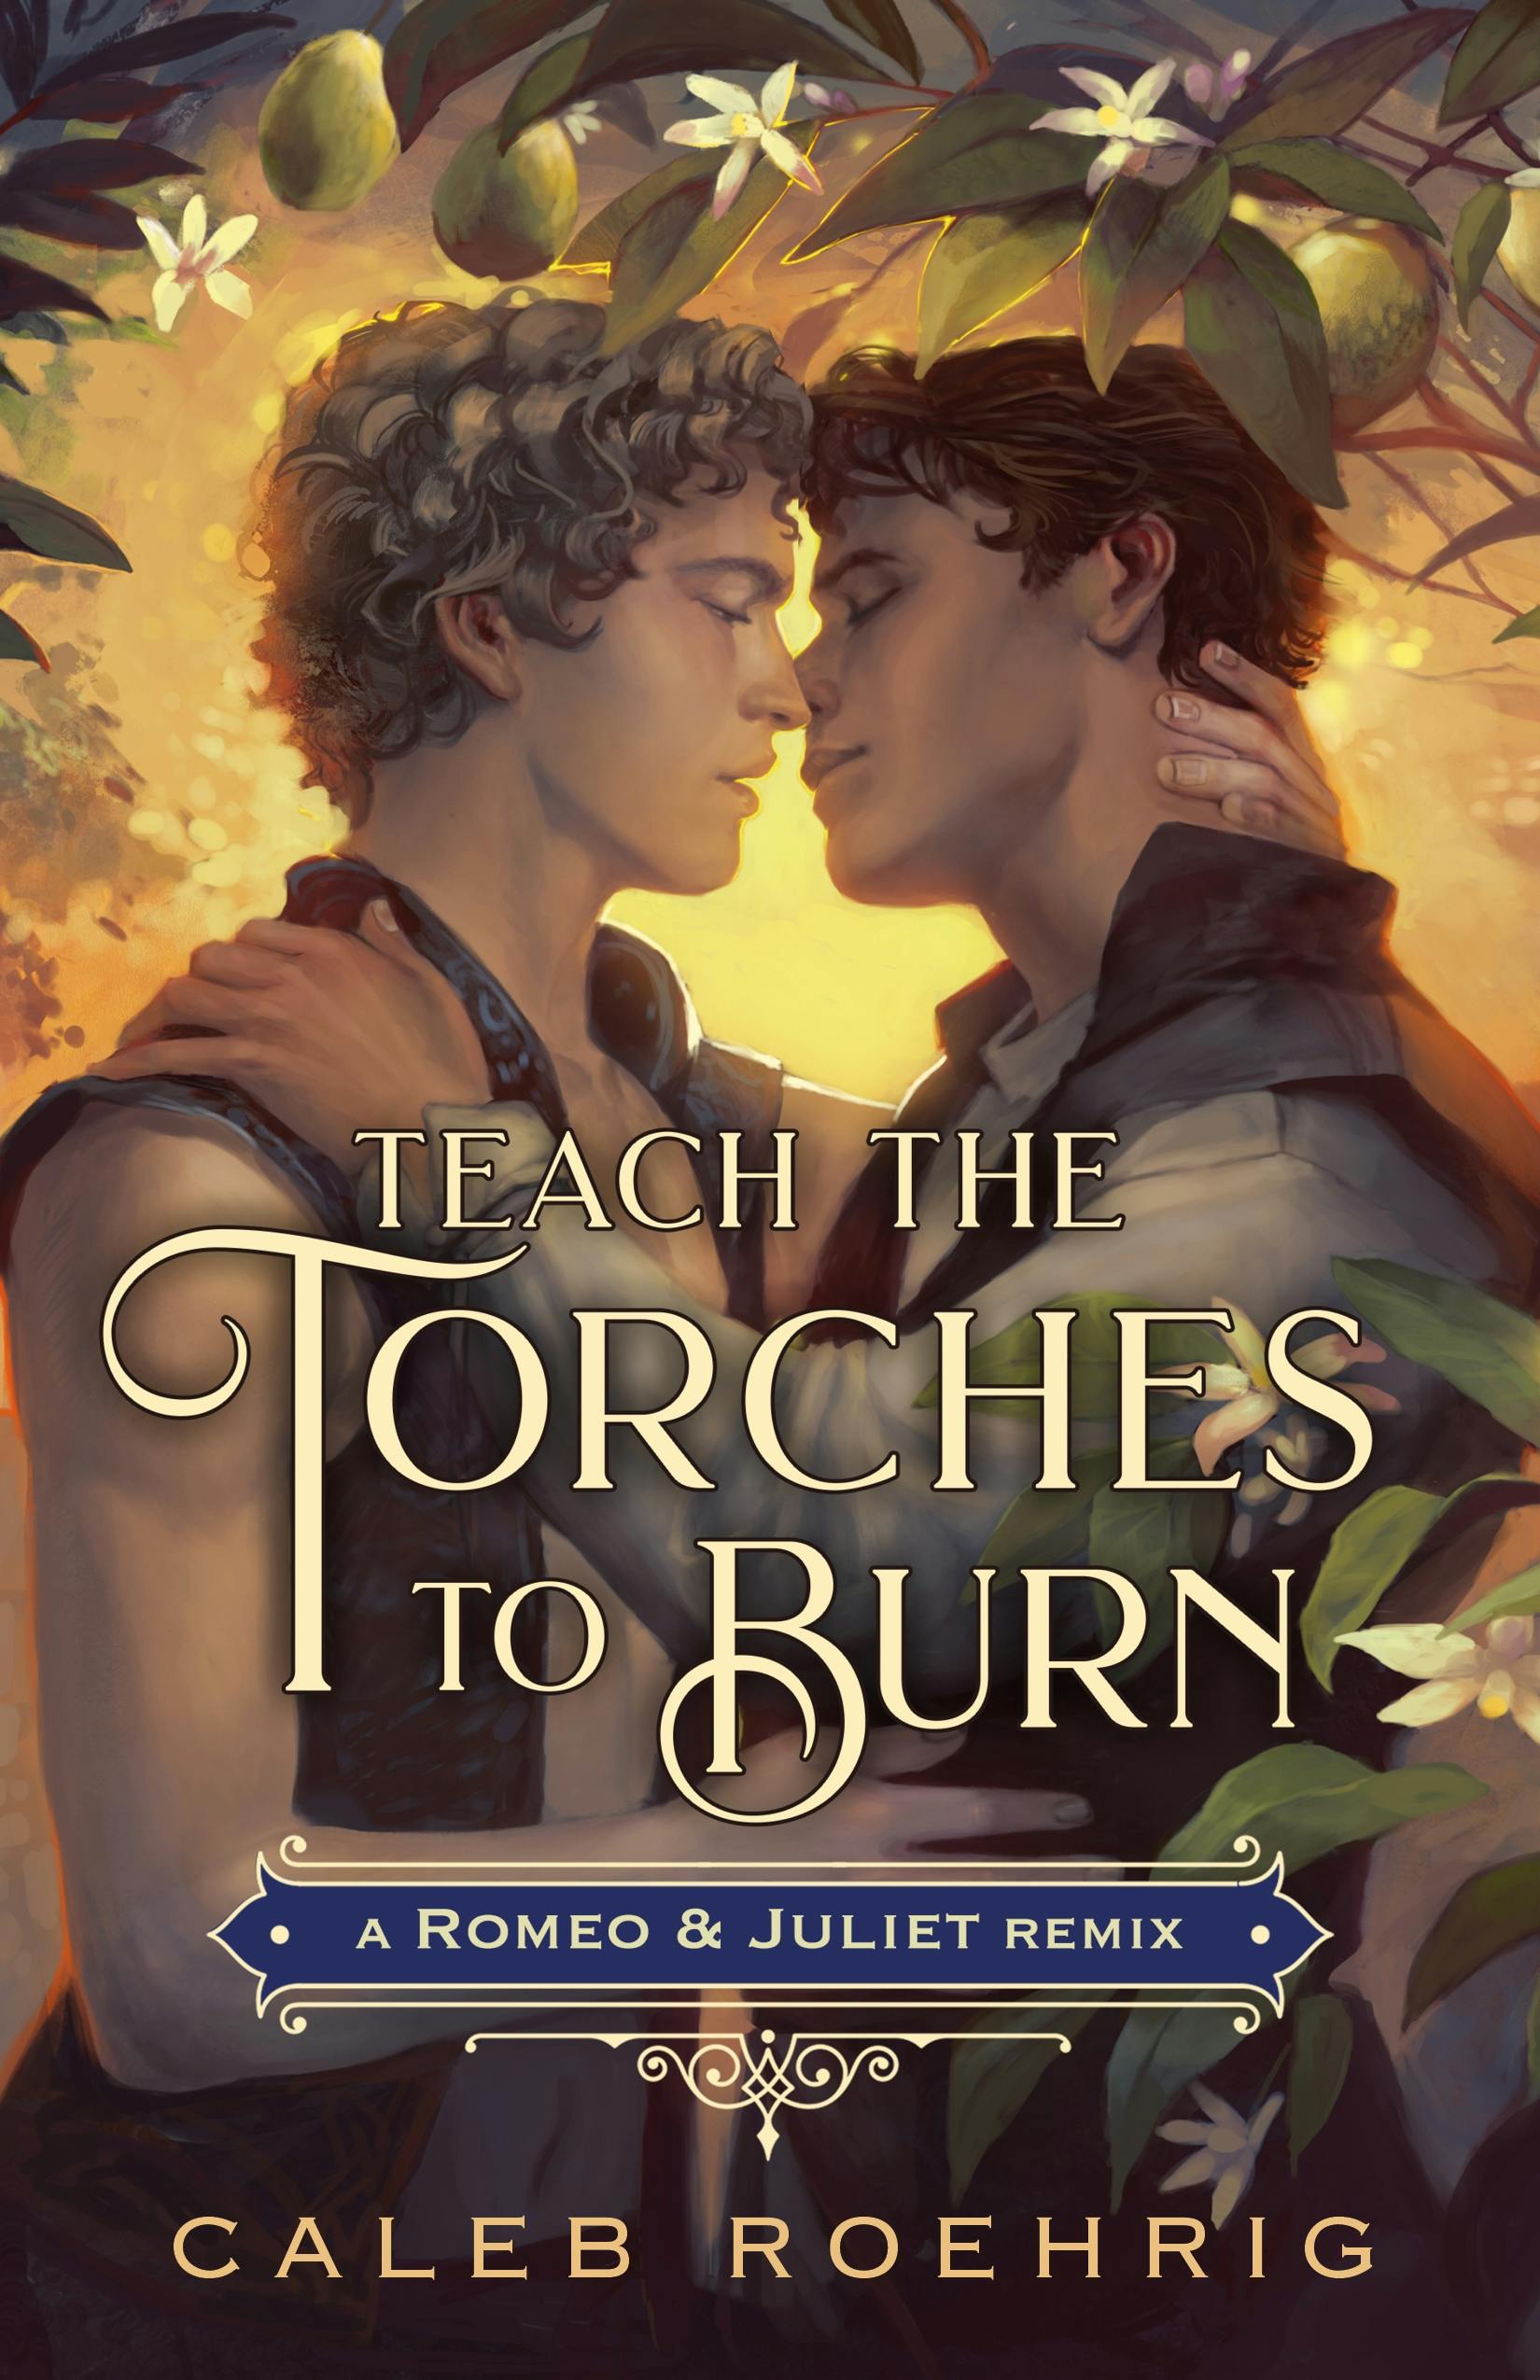 Teach the Torches to Burn A Romeo and Juliet Remix